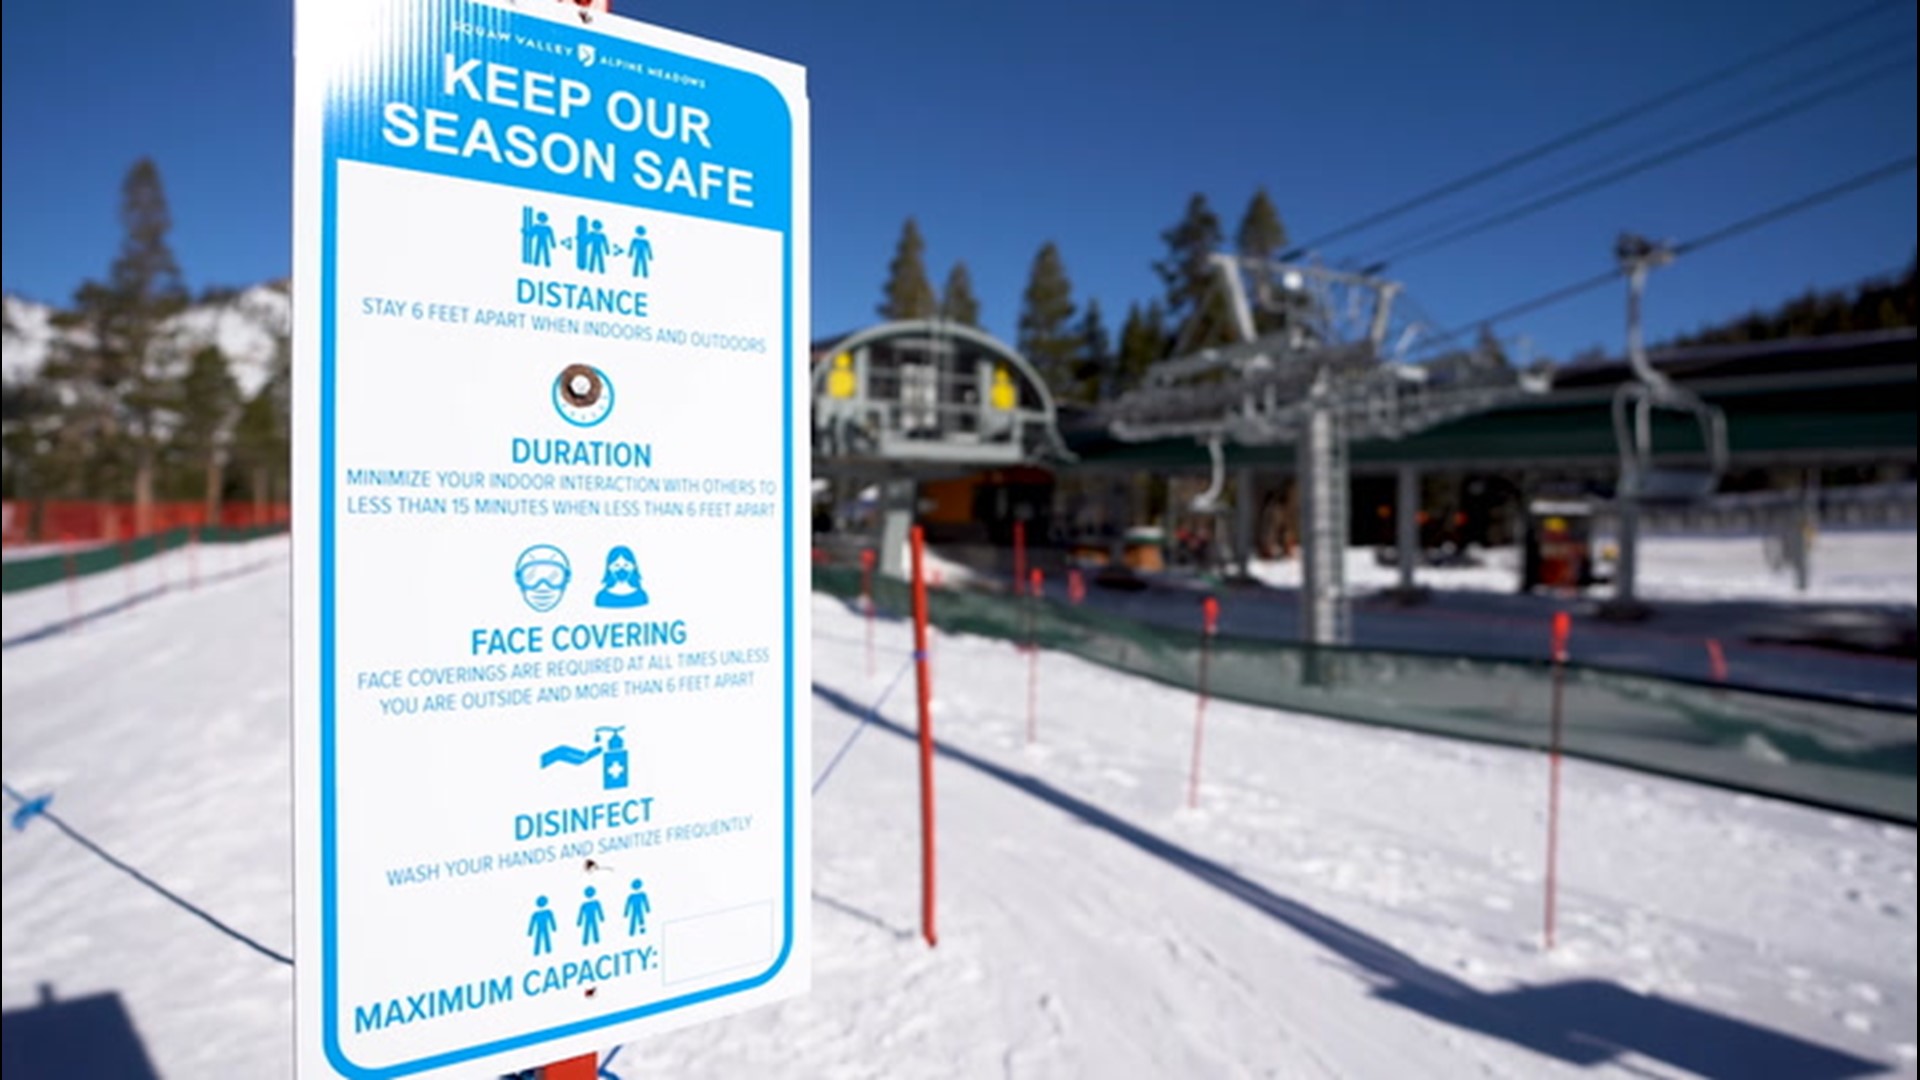 Even though it isn't officially winter yet, many ski resorts around the country have winterlike conditions and are hoping it will be a strong start to a long season.